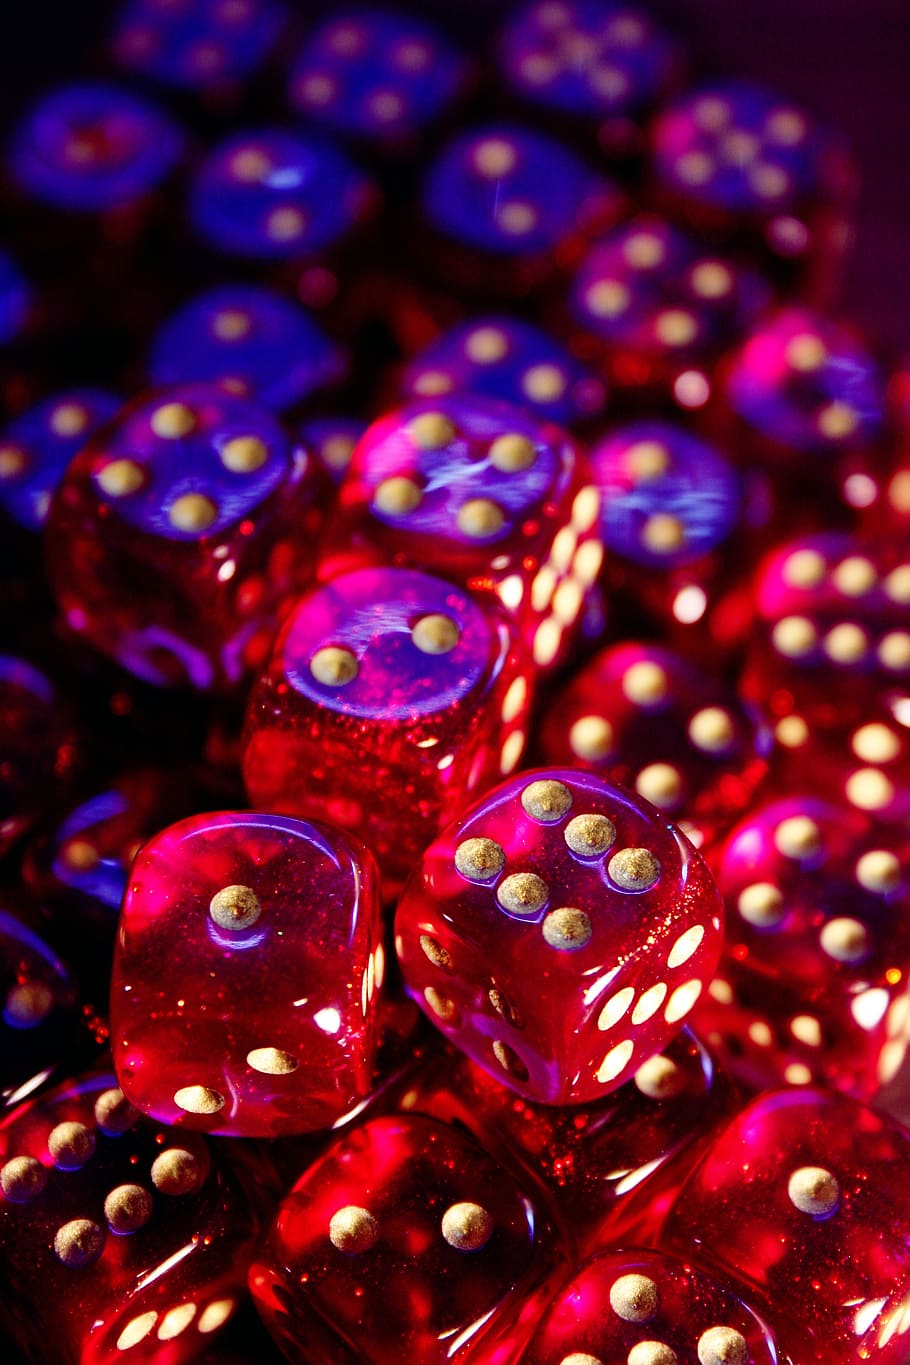 red dice lot, cube, role playing game, pay, instantaneous speed